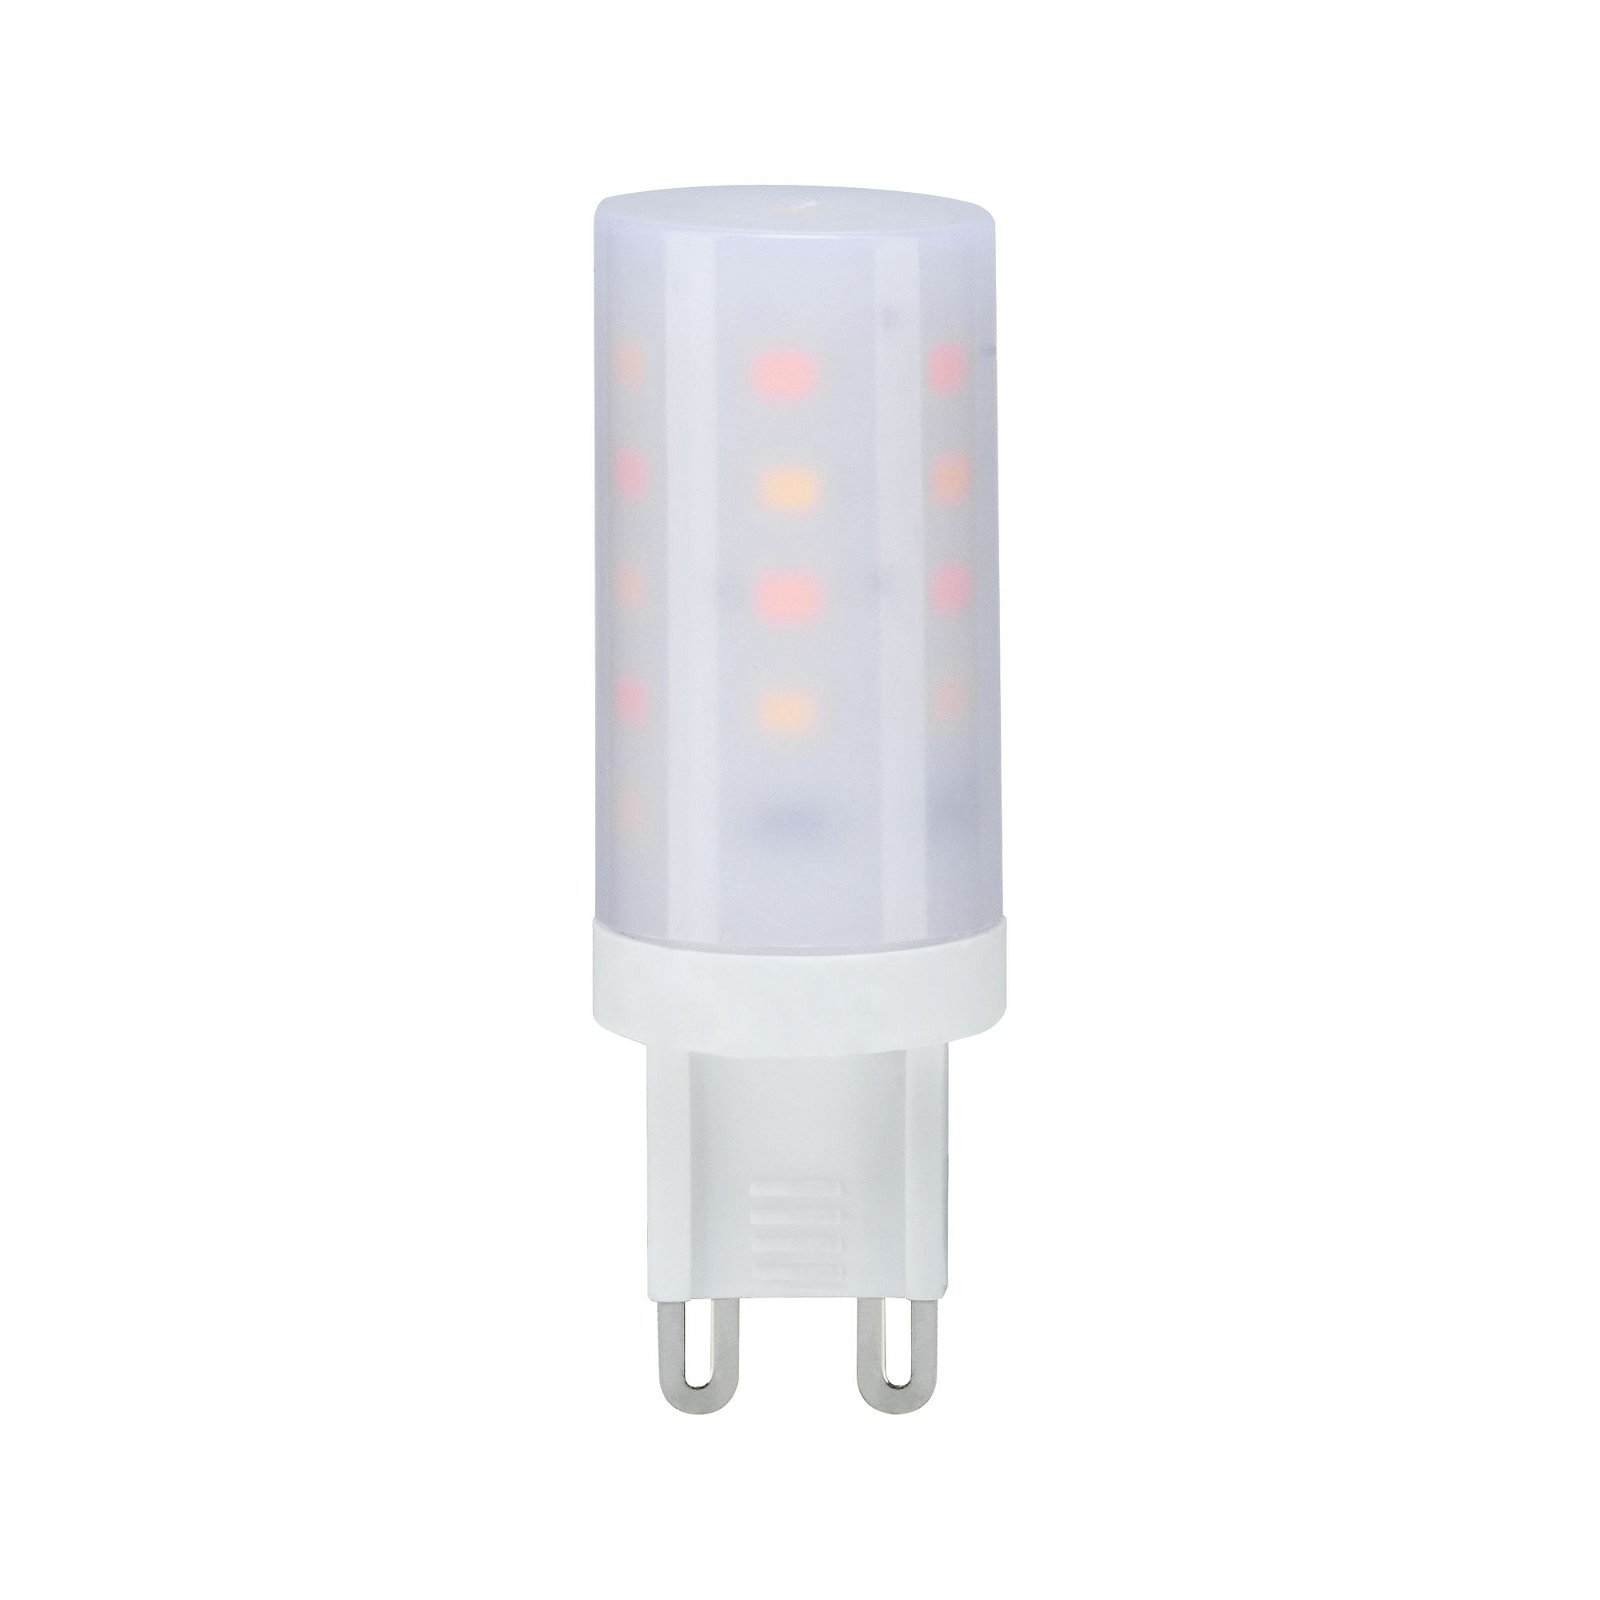 230 V Standard LED Pin base G9 1 pack 270lm 4W Dim to warm dimmable Clear